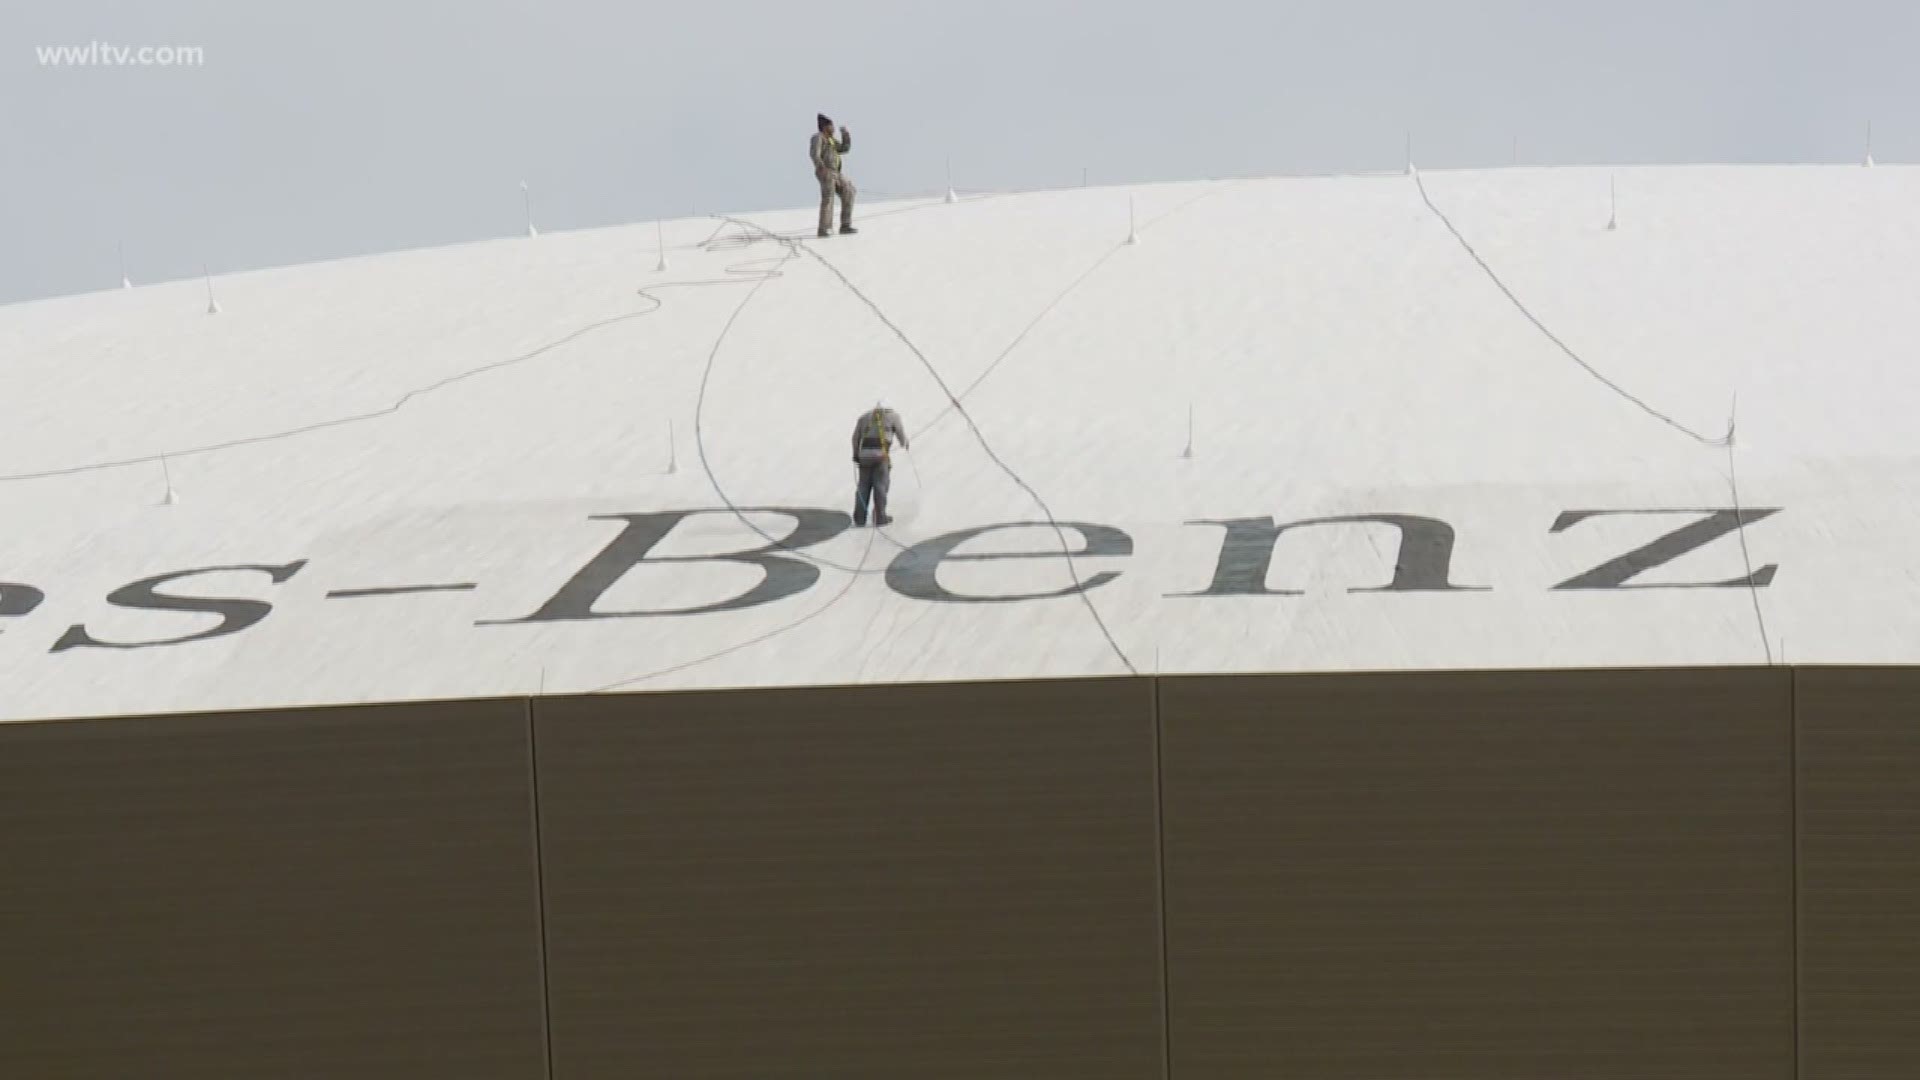 The Superdome cannot be cleaned due to an ongoing lawsuit against a company that guaranteed it would remain white.